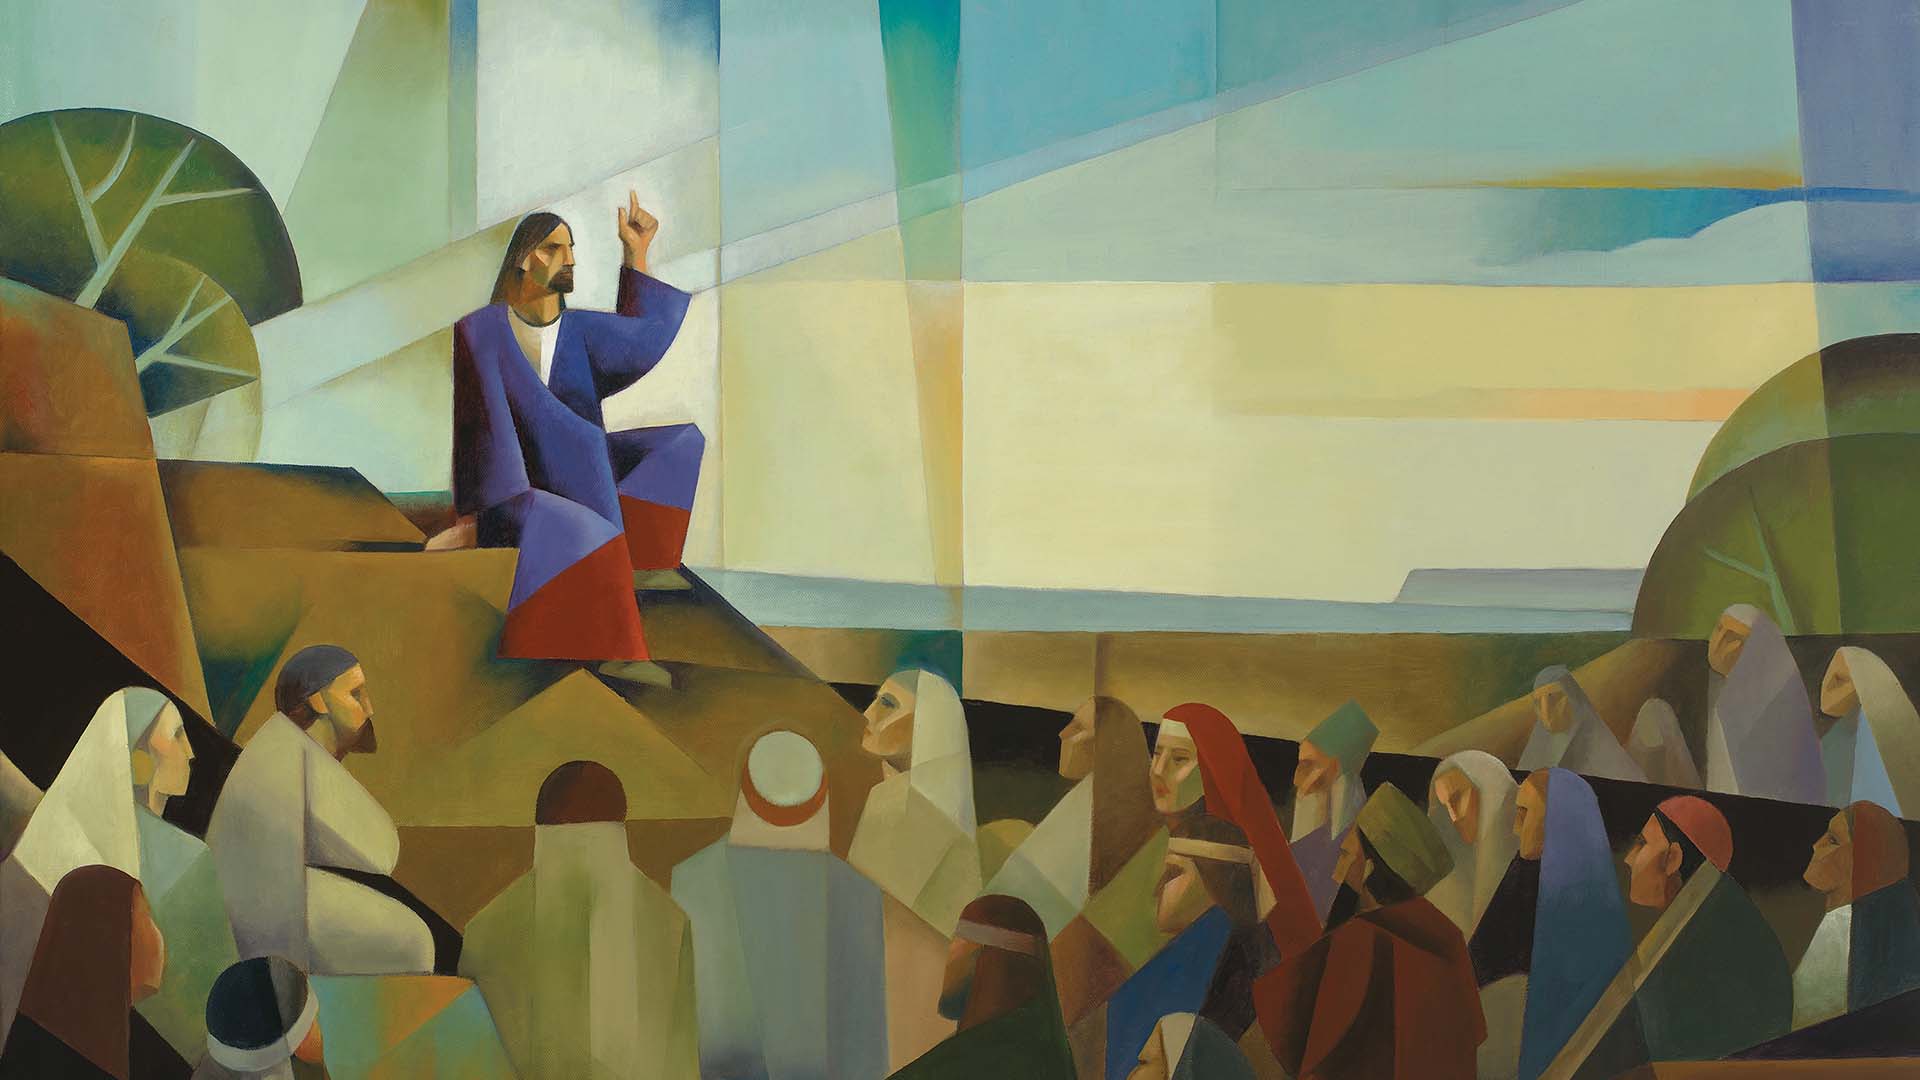 Jesus Christ giving the Sermon on the Mount by Jorge Cocco.